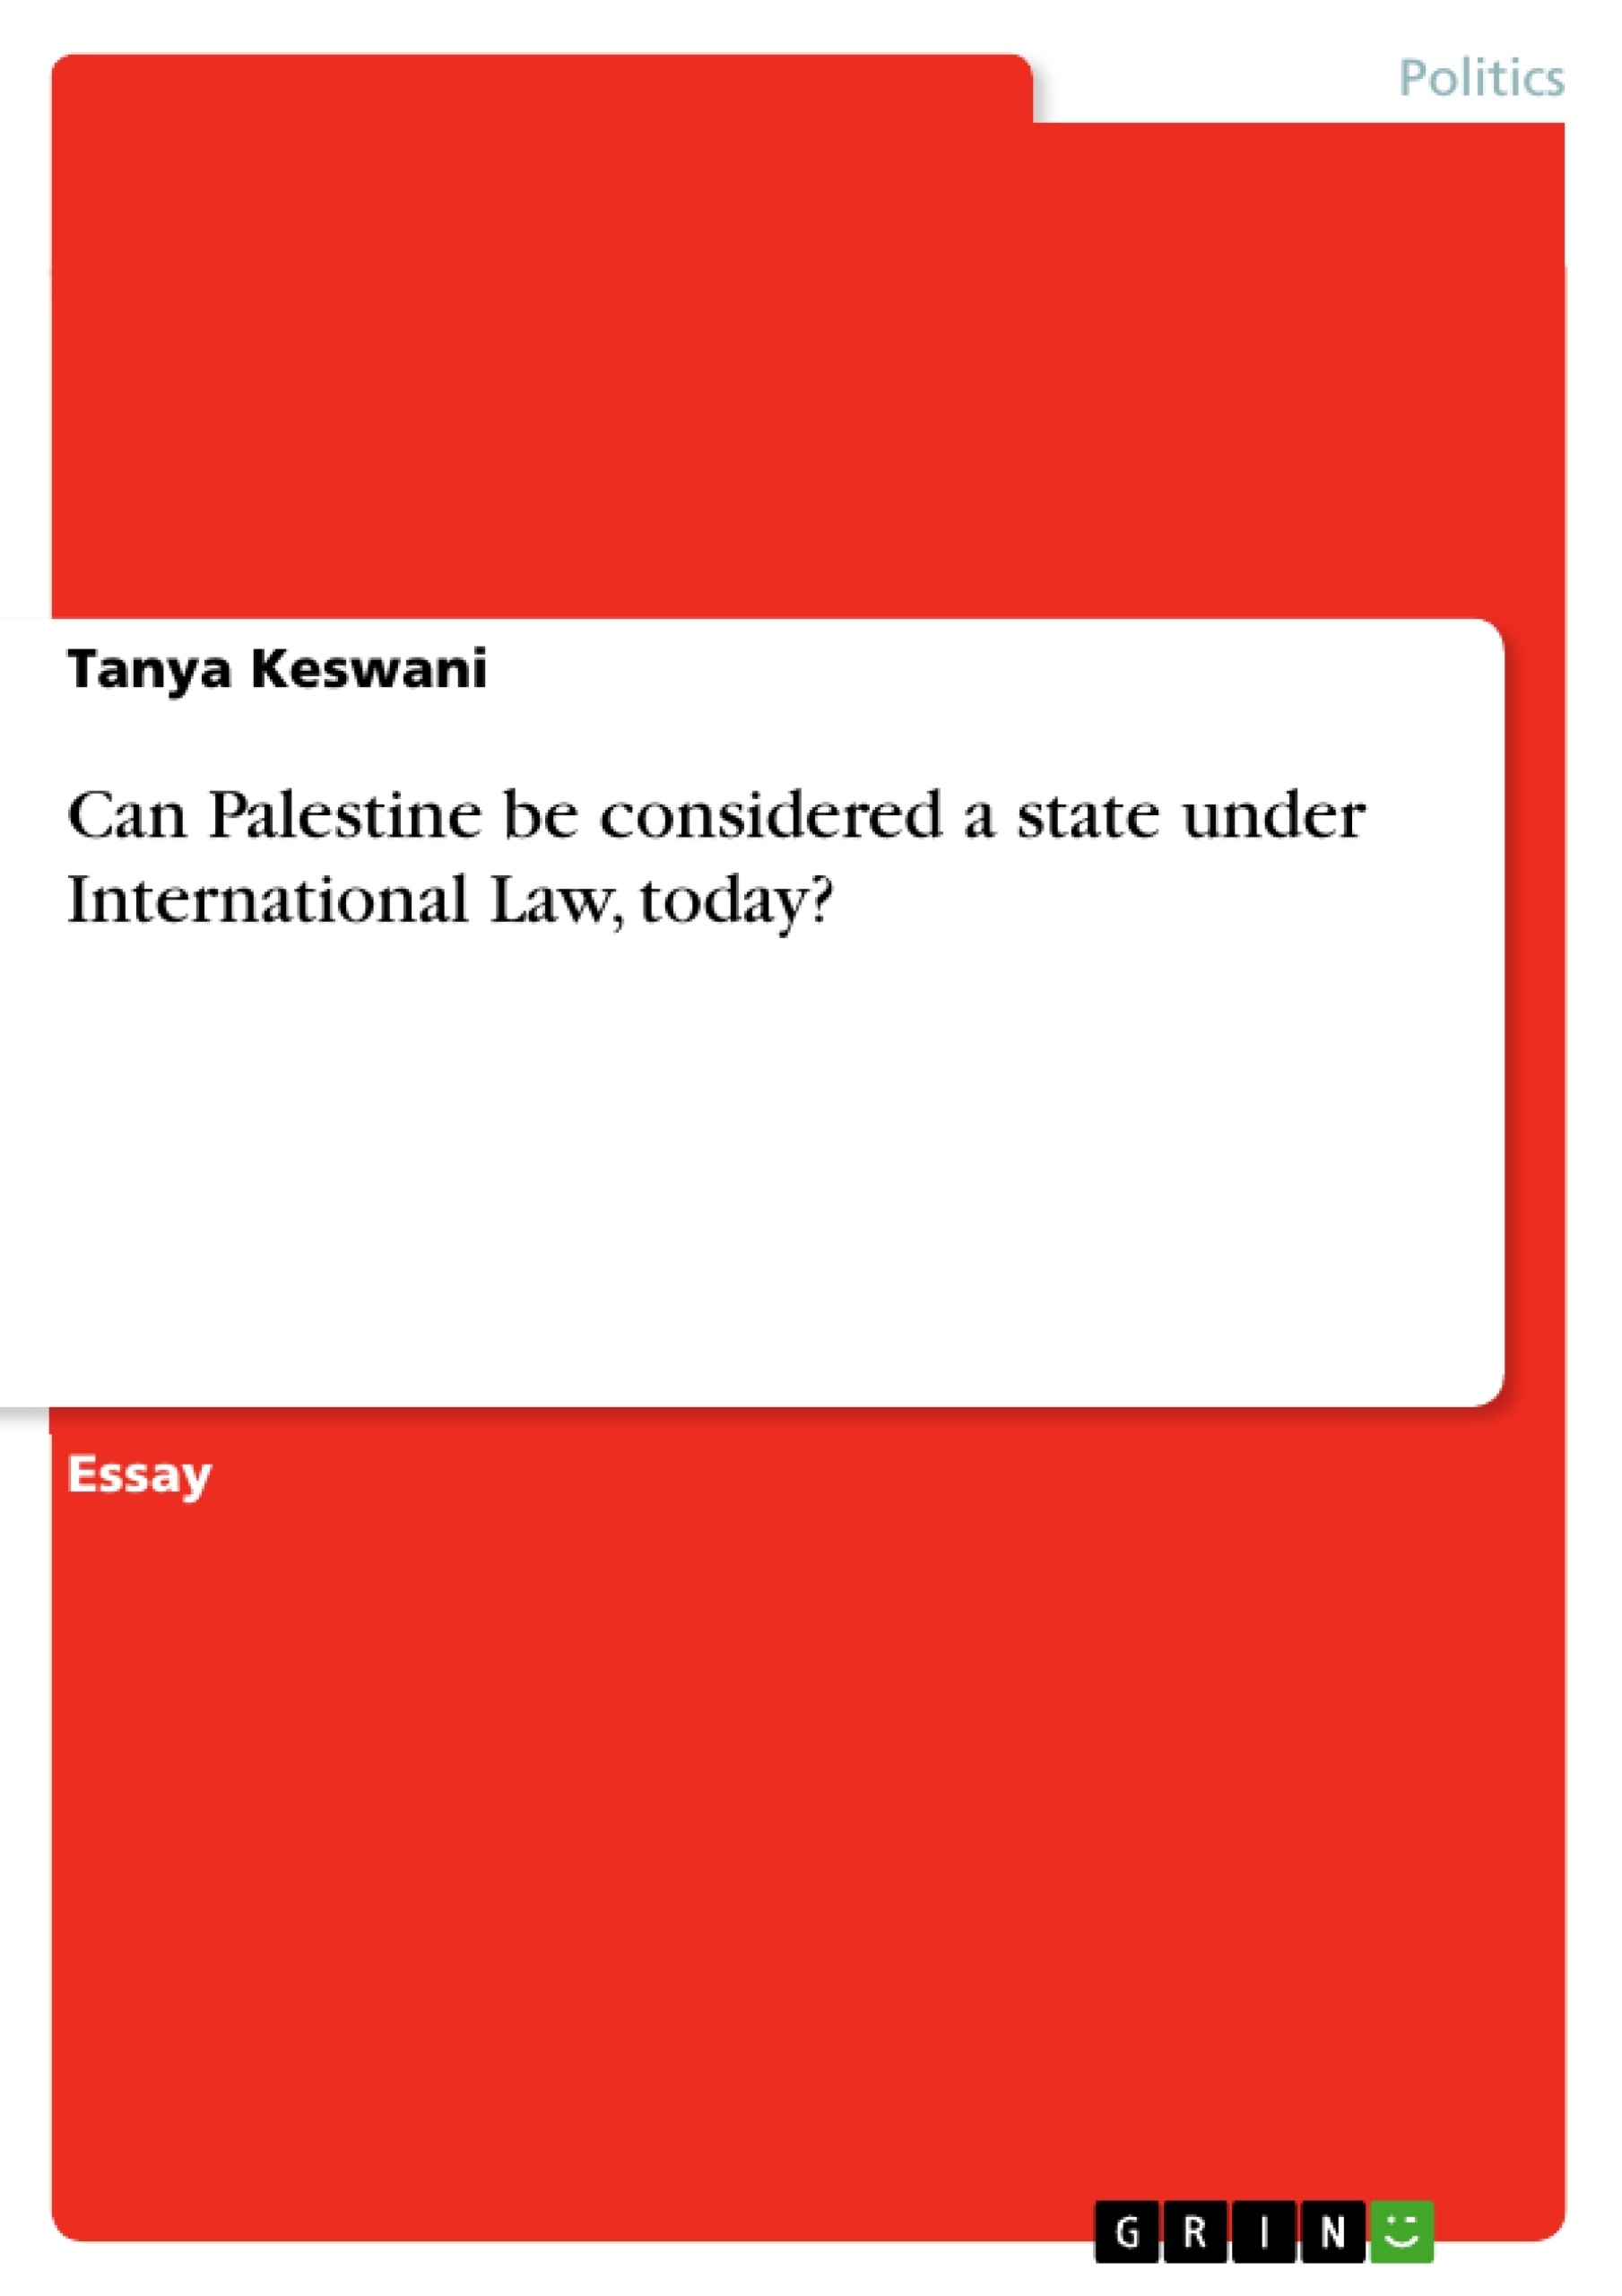 Title: Can Palestine be considered a state under International Law, today?